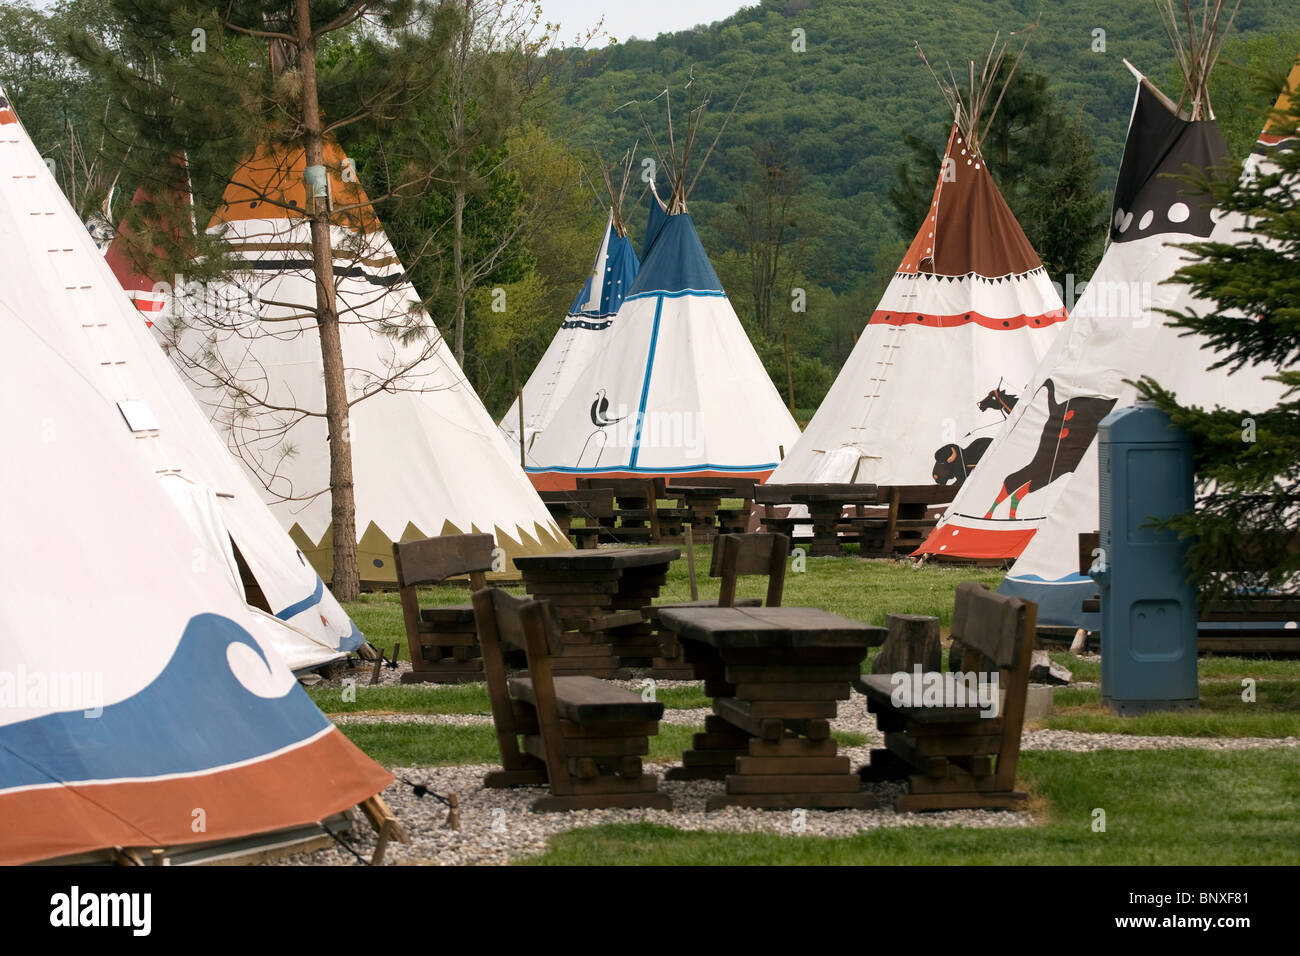 Copy of the Native Americans village with wigwams. Stock Photo